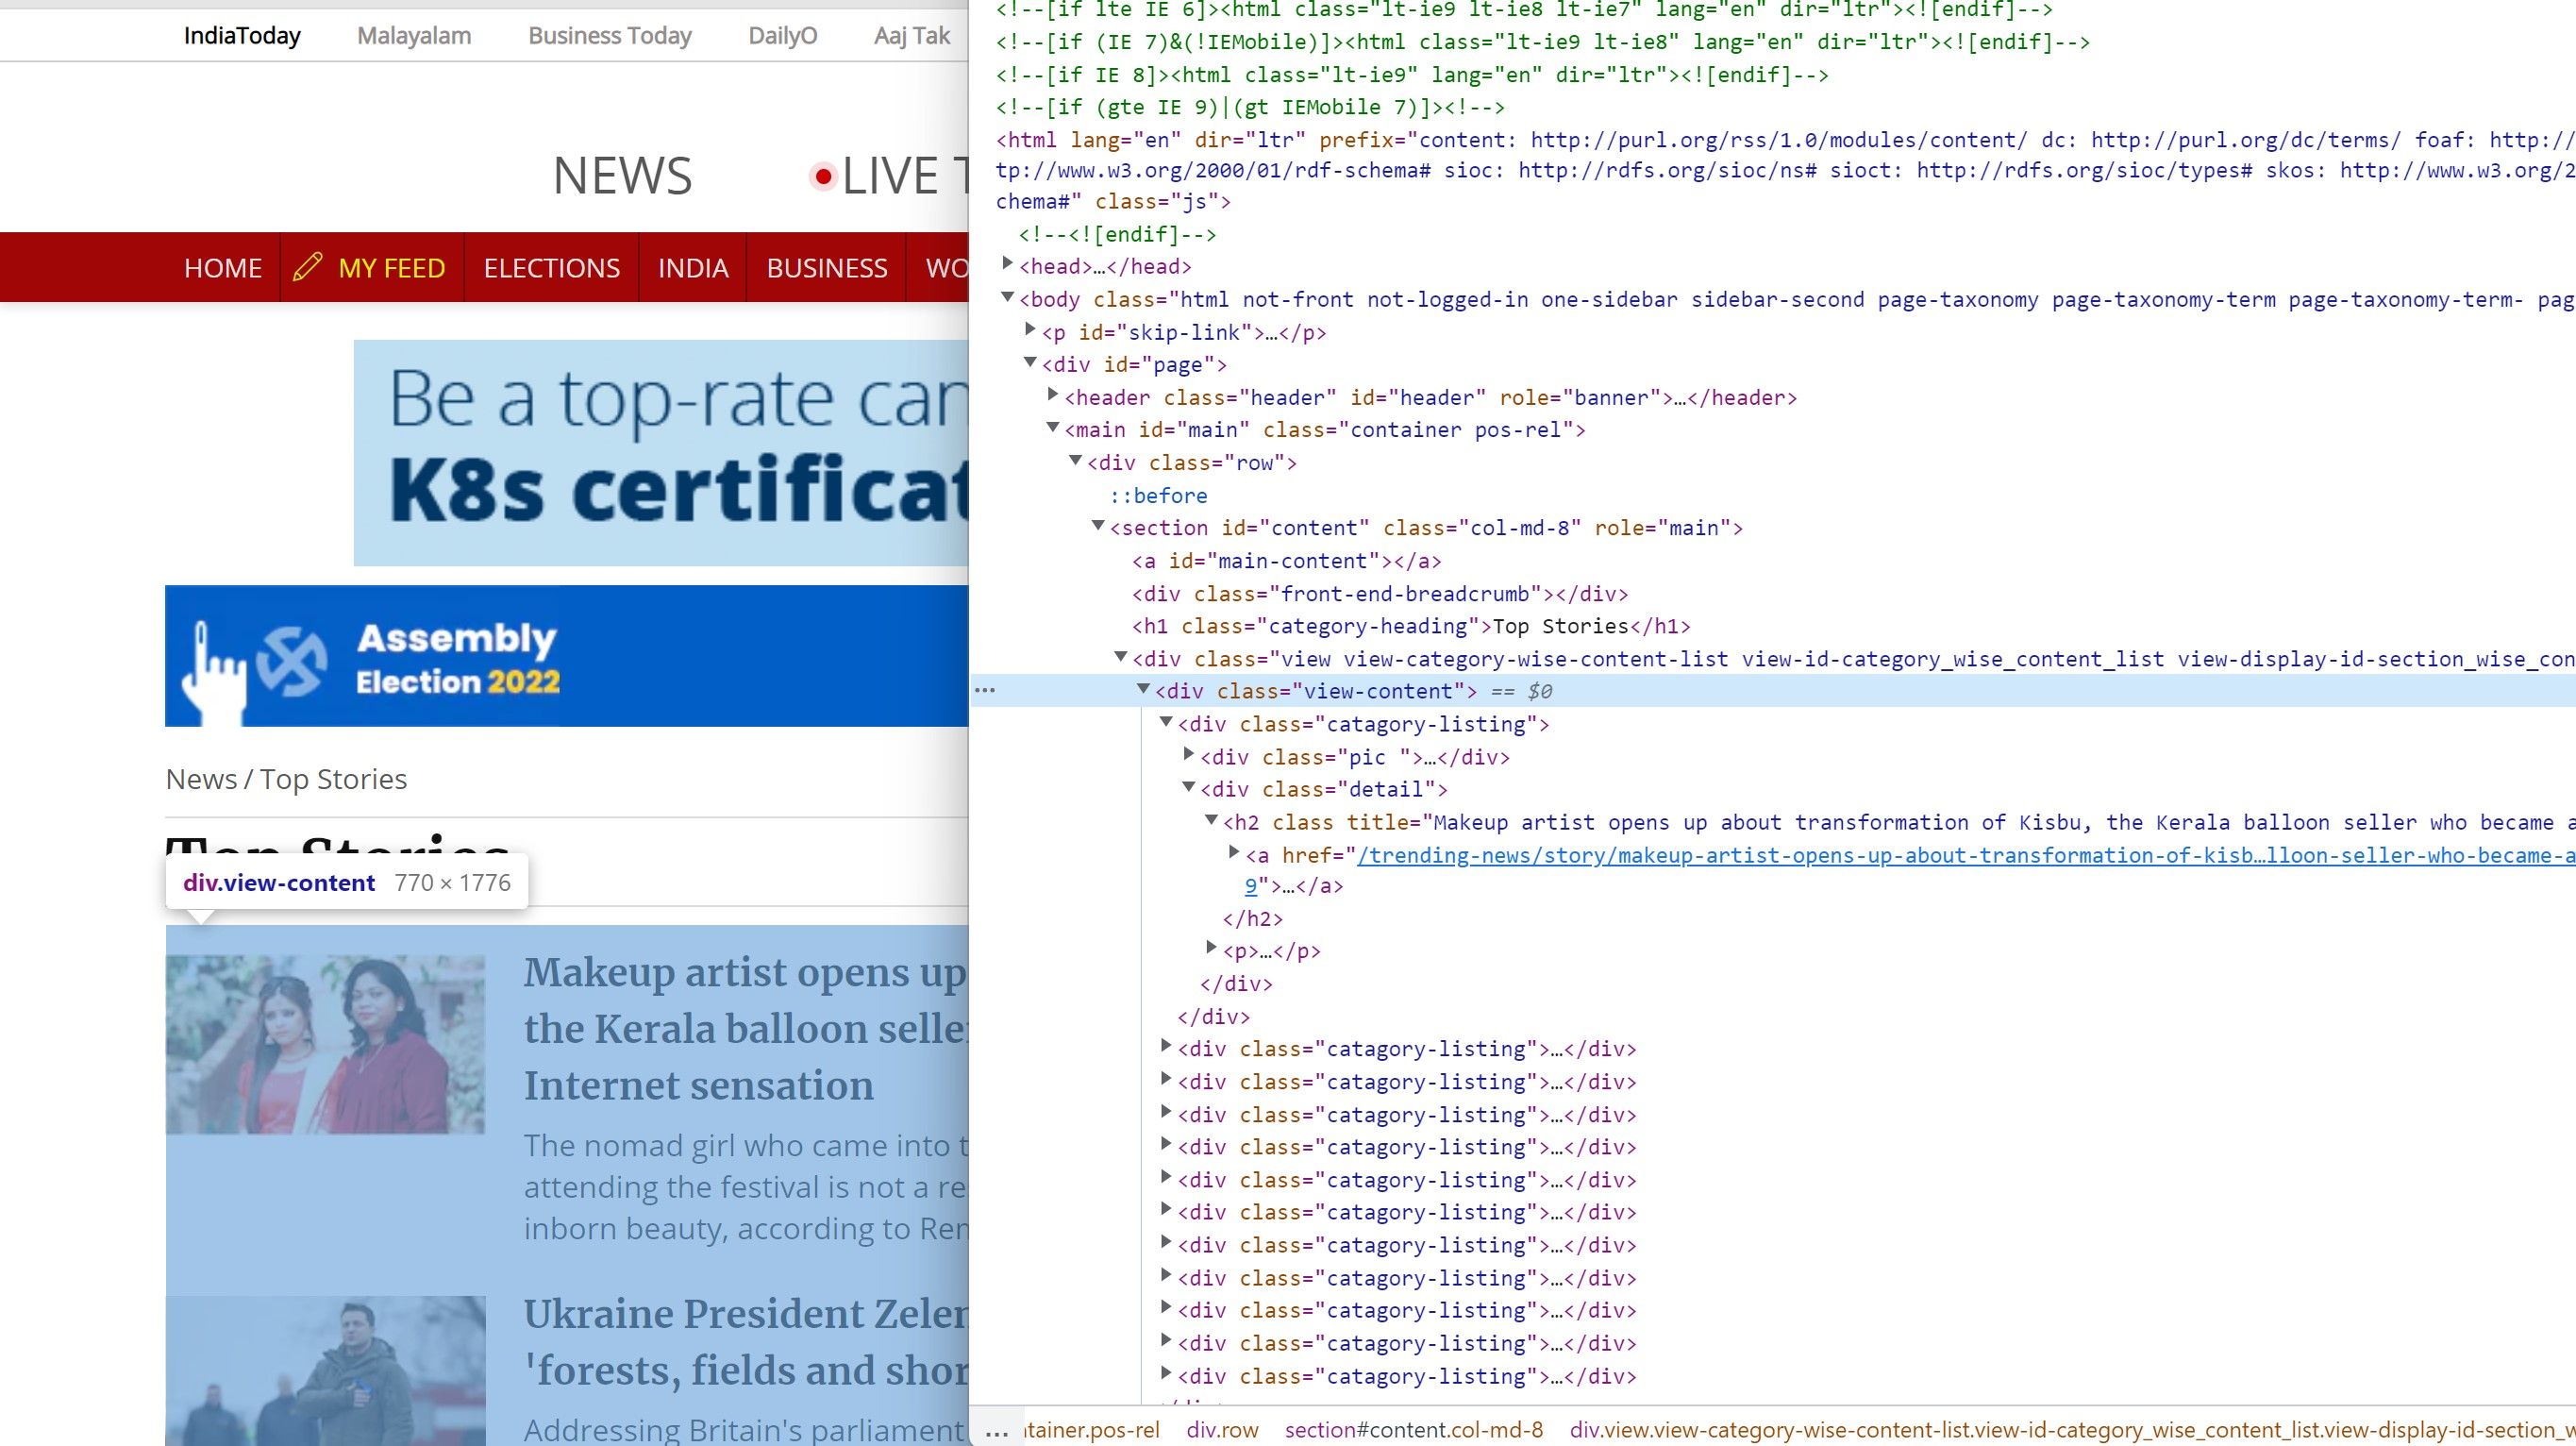 HTML code window on the India Today website